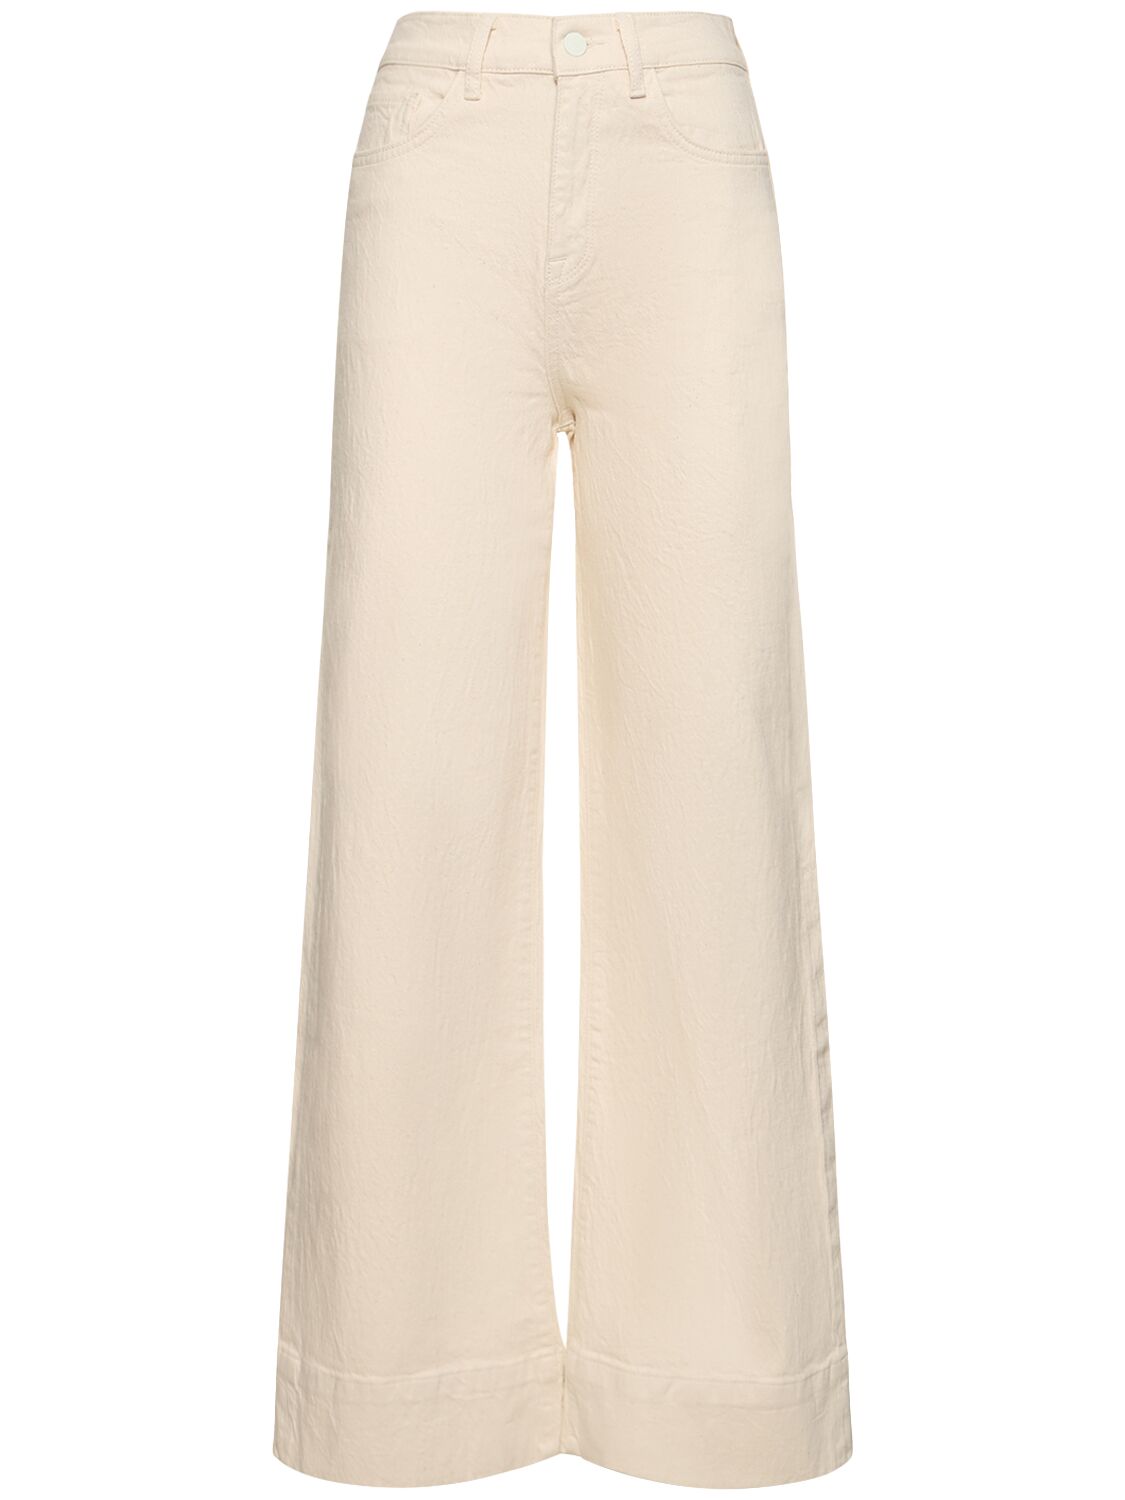 Ms. Onassis V-high Rise Wide Leg Jeans